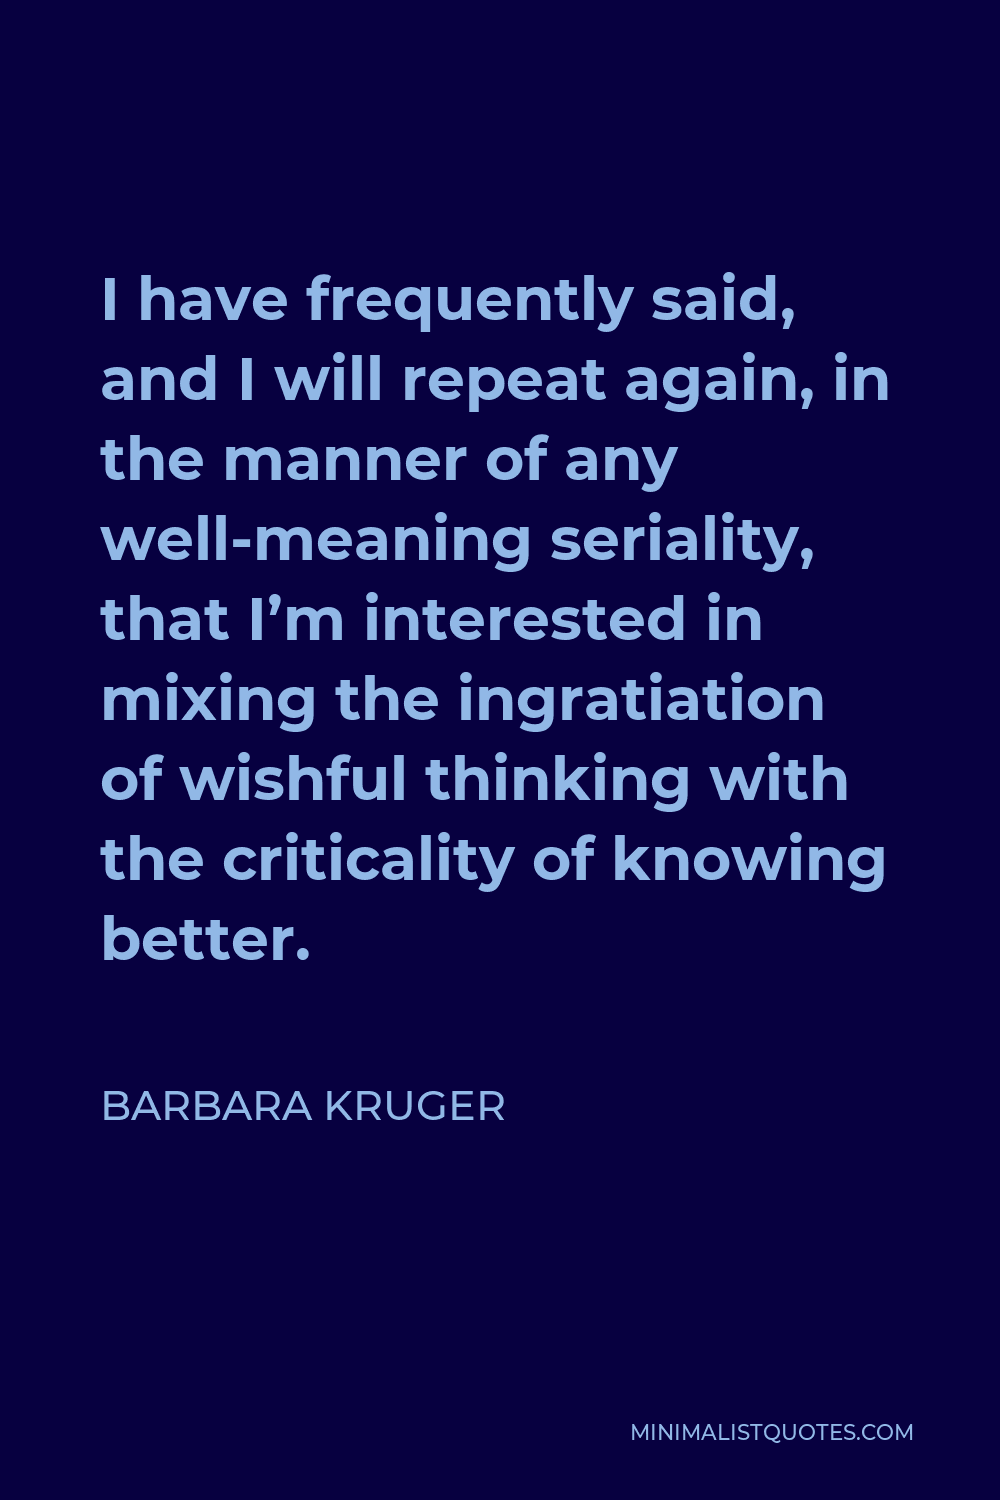 Barbara Kruger Quote - I have frequently said, and I will repeat again, in the manner of any well-meaning seriality, that I’m interested in mixing the ingratiation of wishful thinking with the criticality of knowing better.